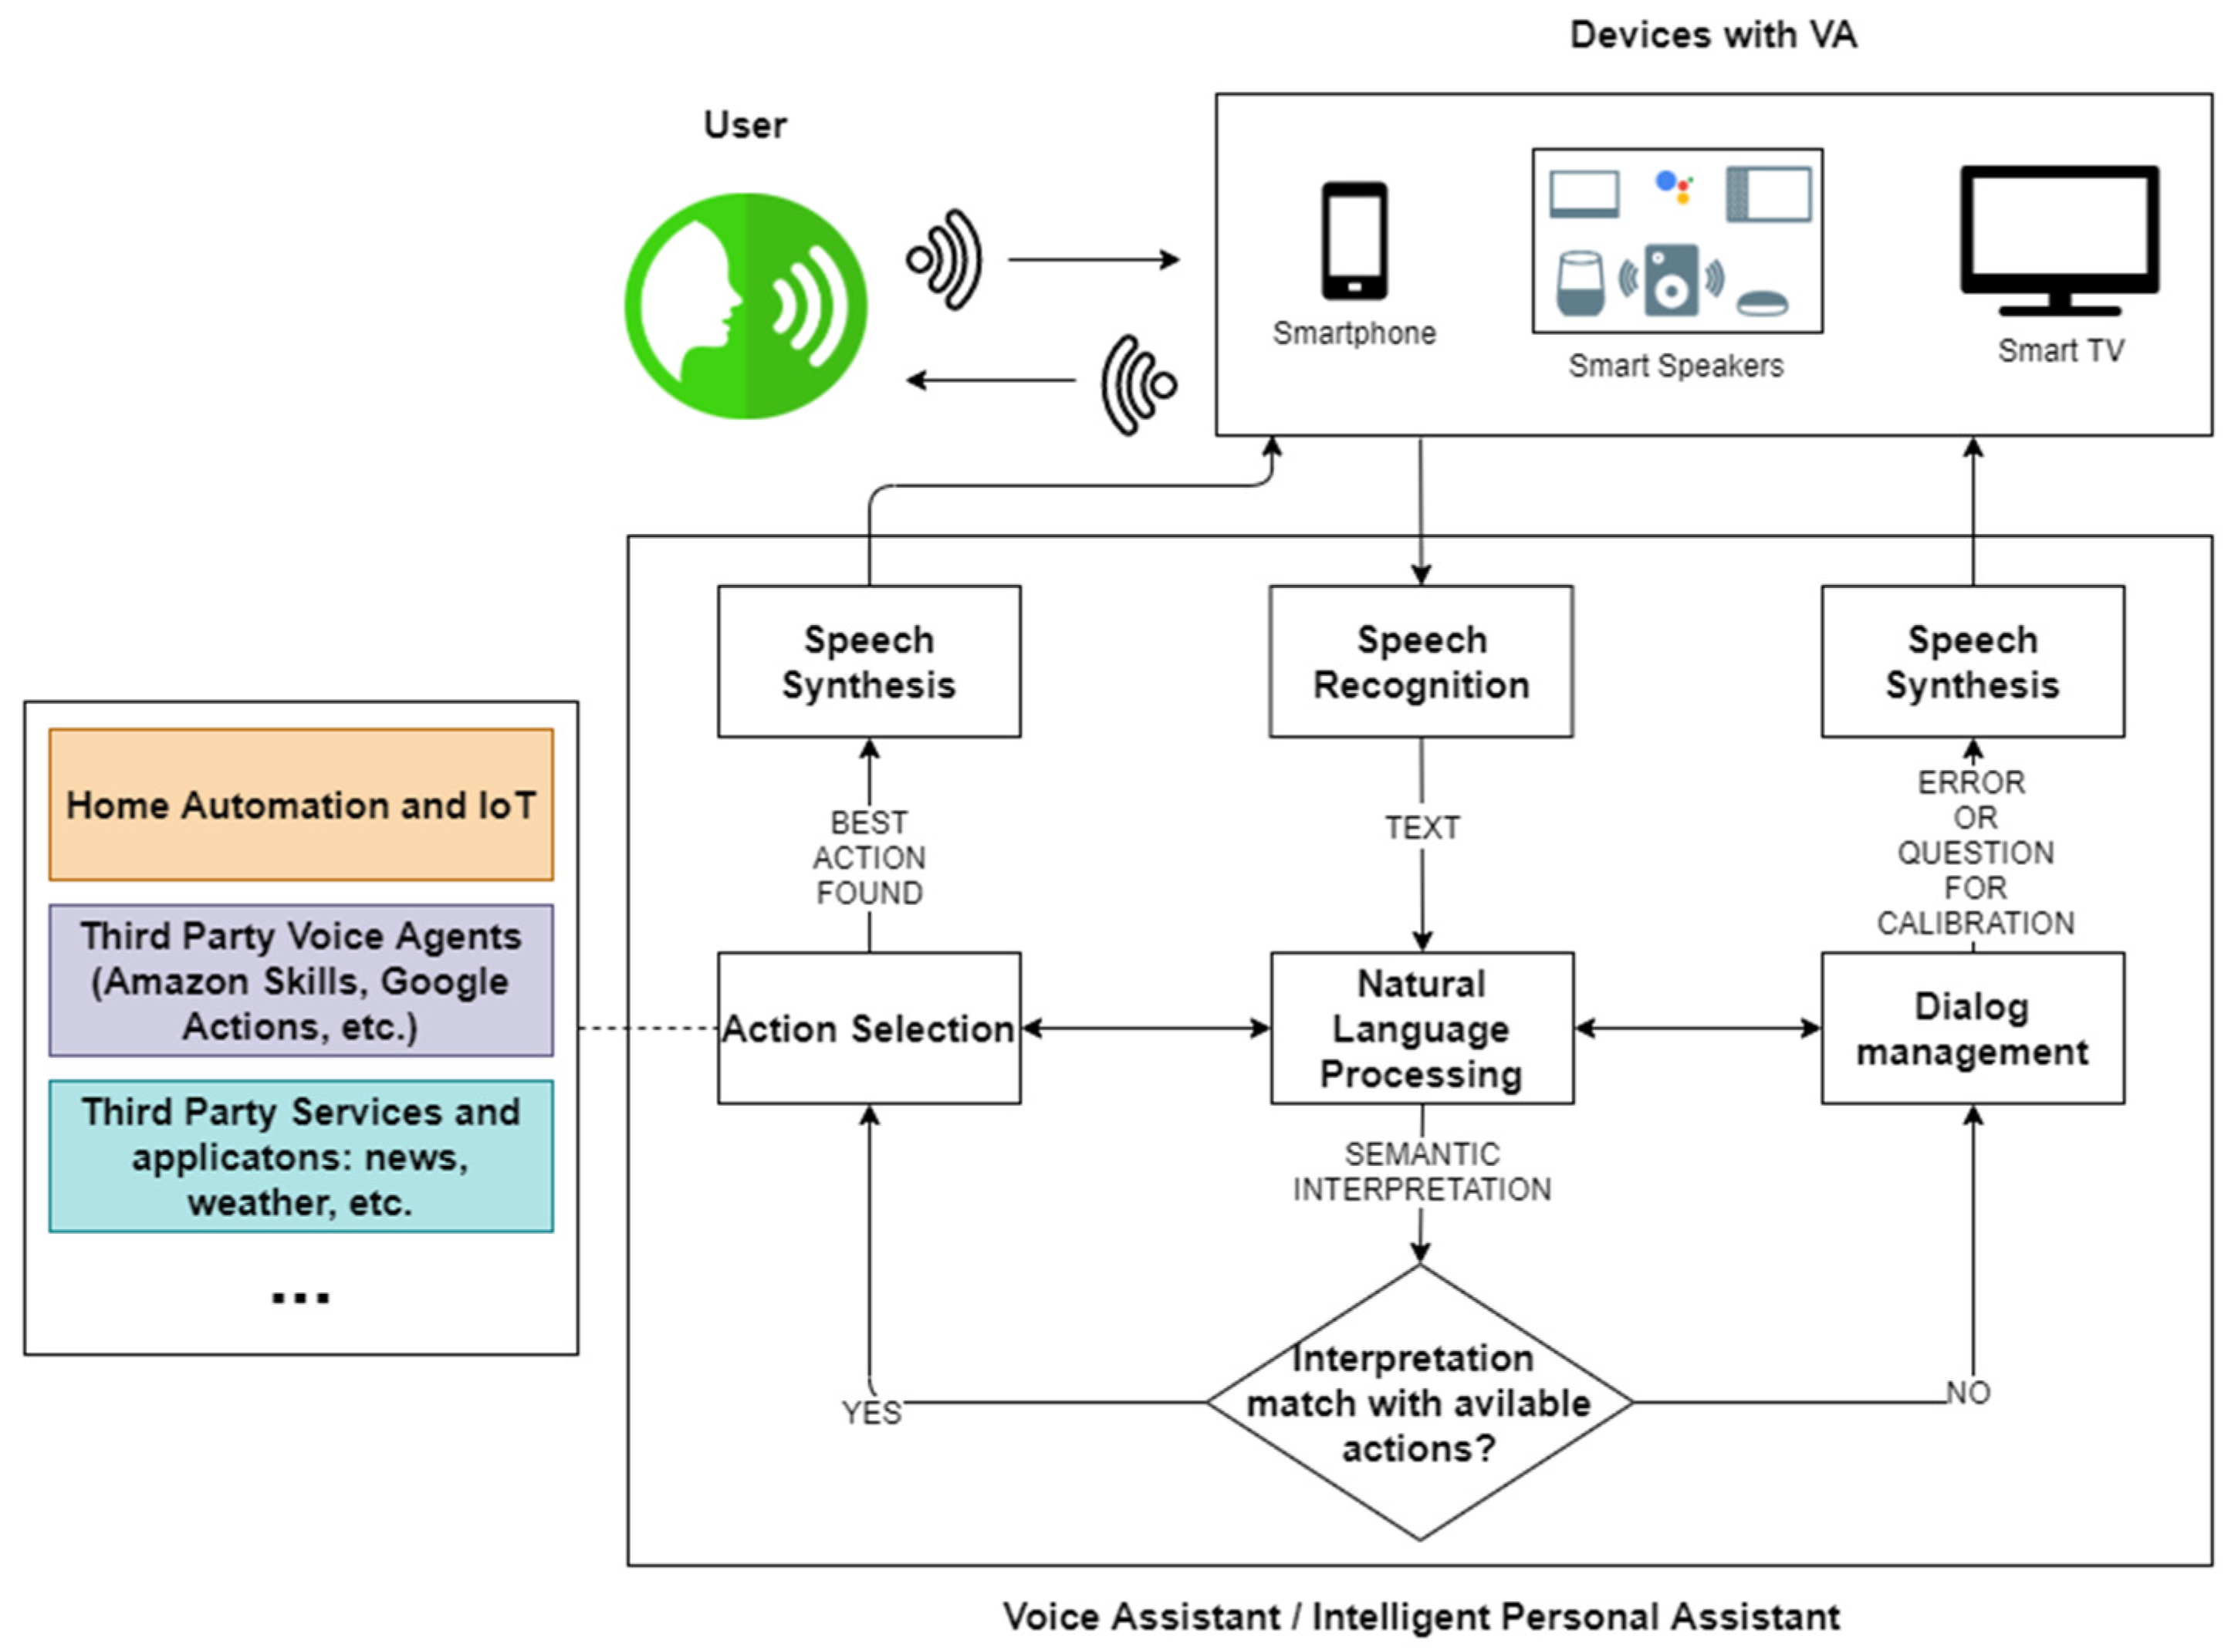 Components of a Voice Assistant.